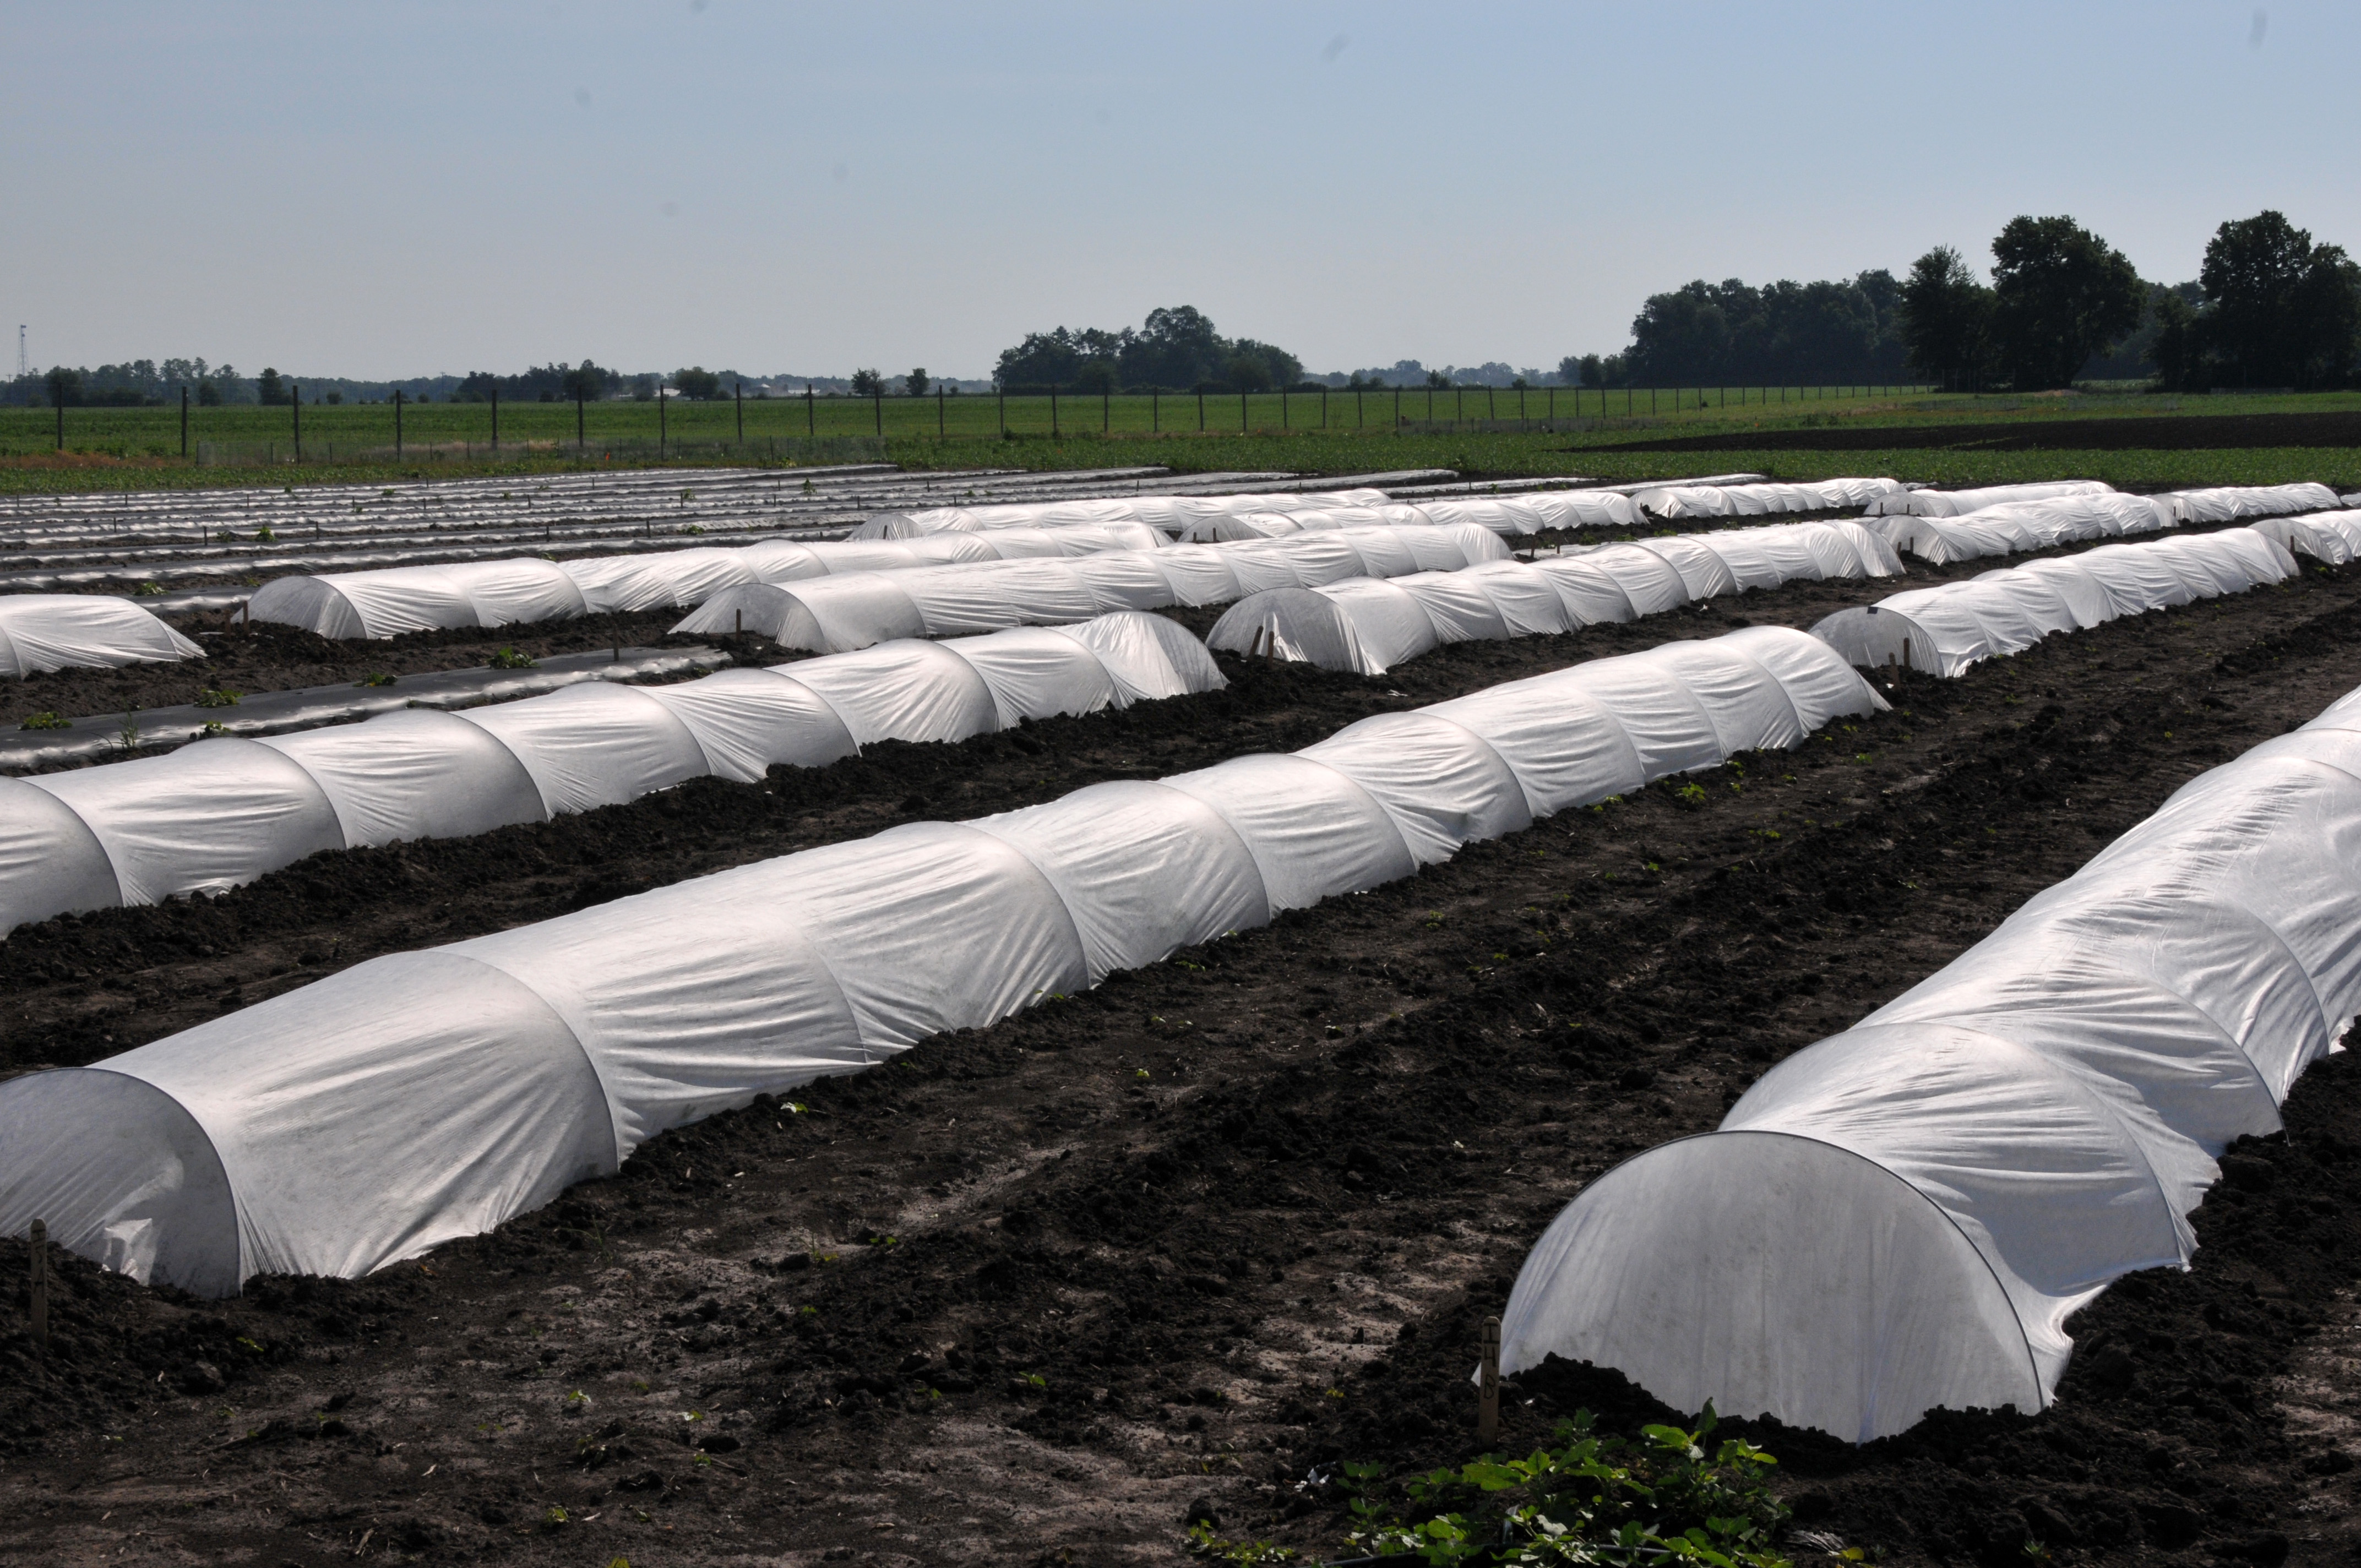 Row covers in a field.